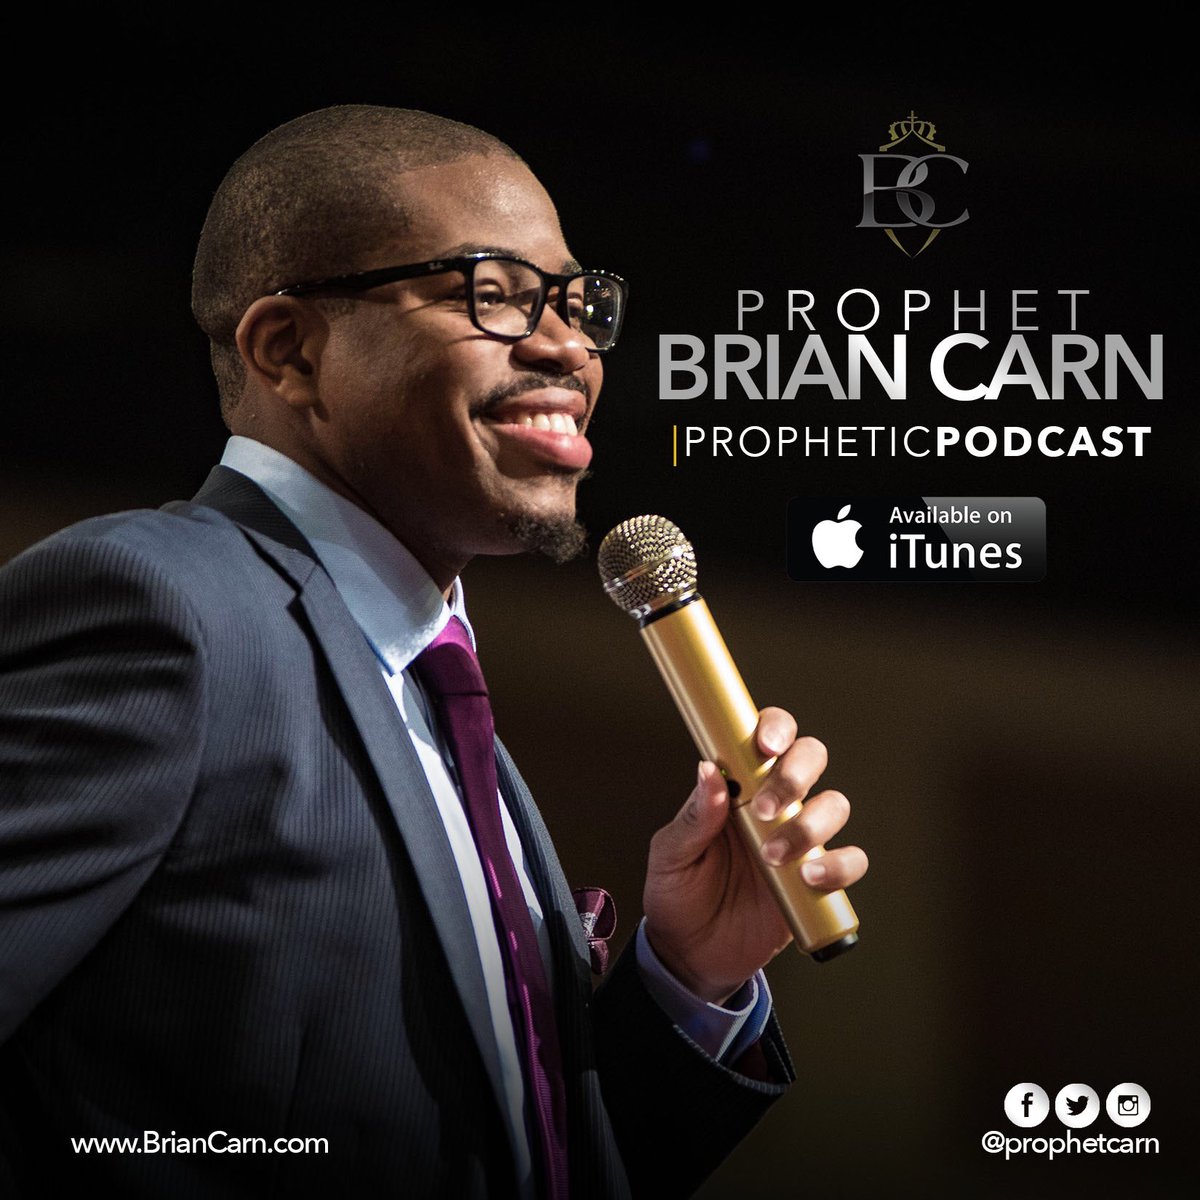 God has been giving us so much revelation of His Word! Listen to some of my recent teachings & Clarion Calls on the “Prophetic Podcast”, available on the Podcasts & Podbean Apps, or BrianCarn.com under “Media” #BrianCarn #PropheticPodcast